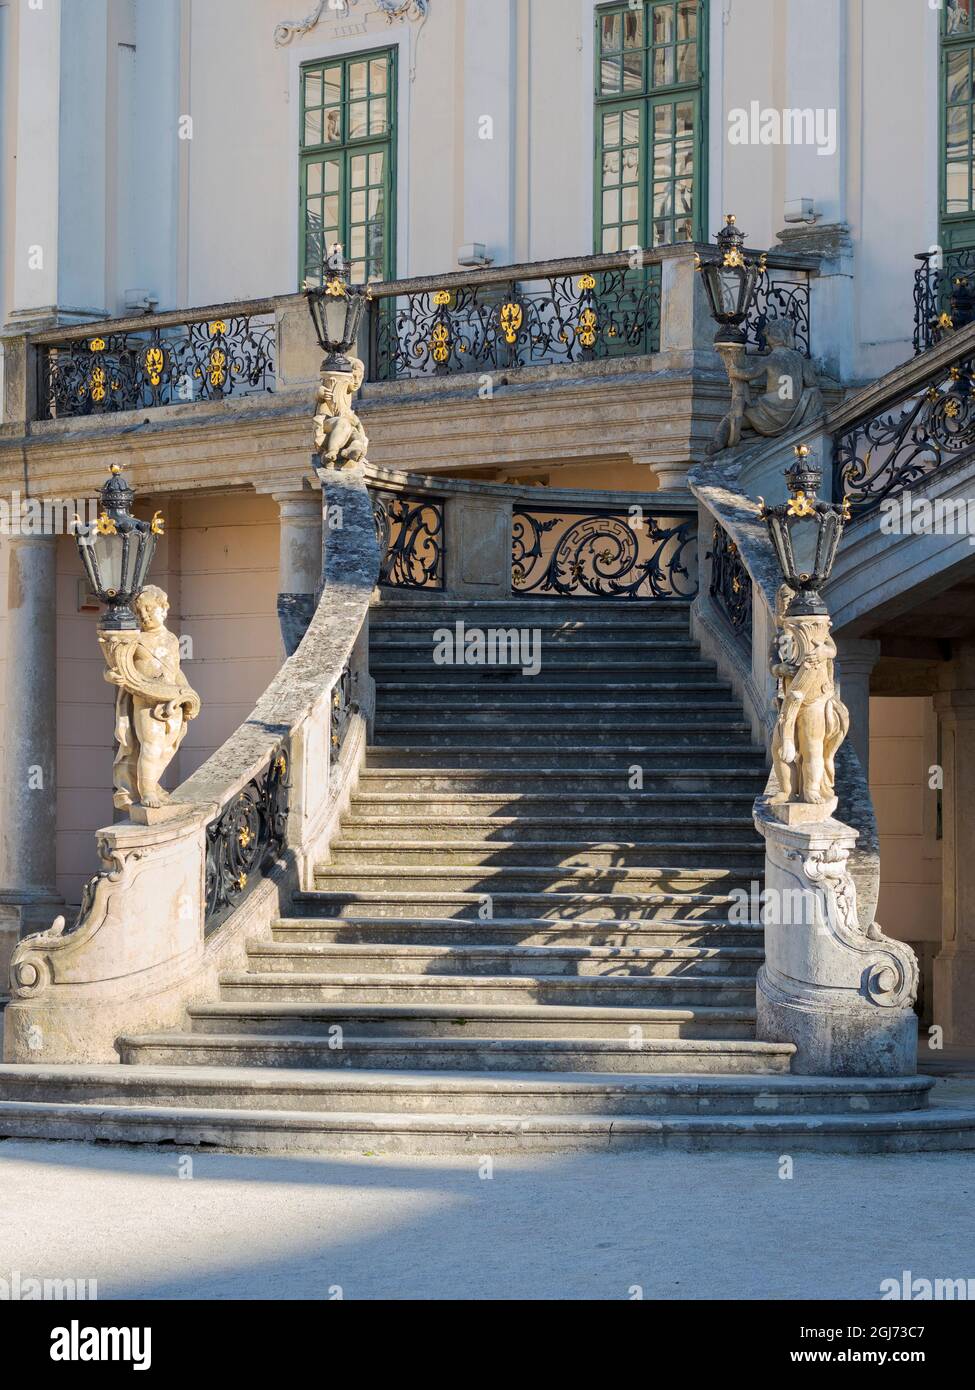 The grand staircase. Esterhazy Palace also called Eszterhaza or Fertoed. Part of UNESCO World Heritage Site Fertoe - Neusiedlersee Cultural Landscape. Stock Photo